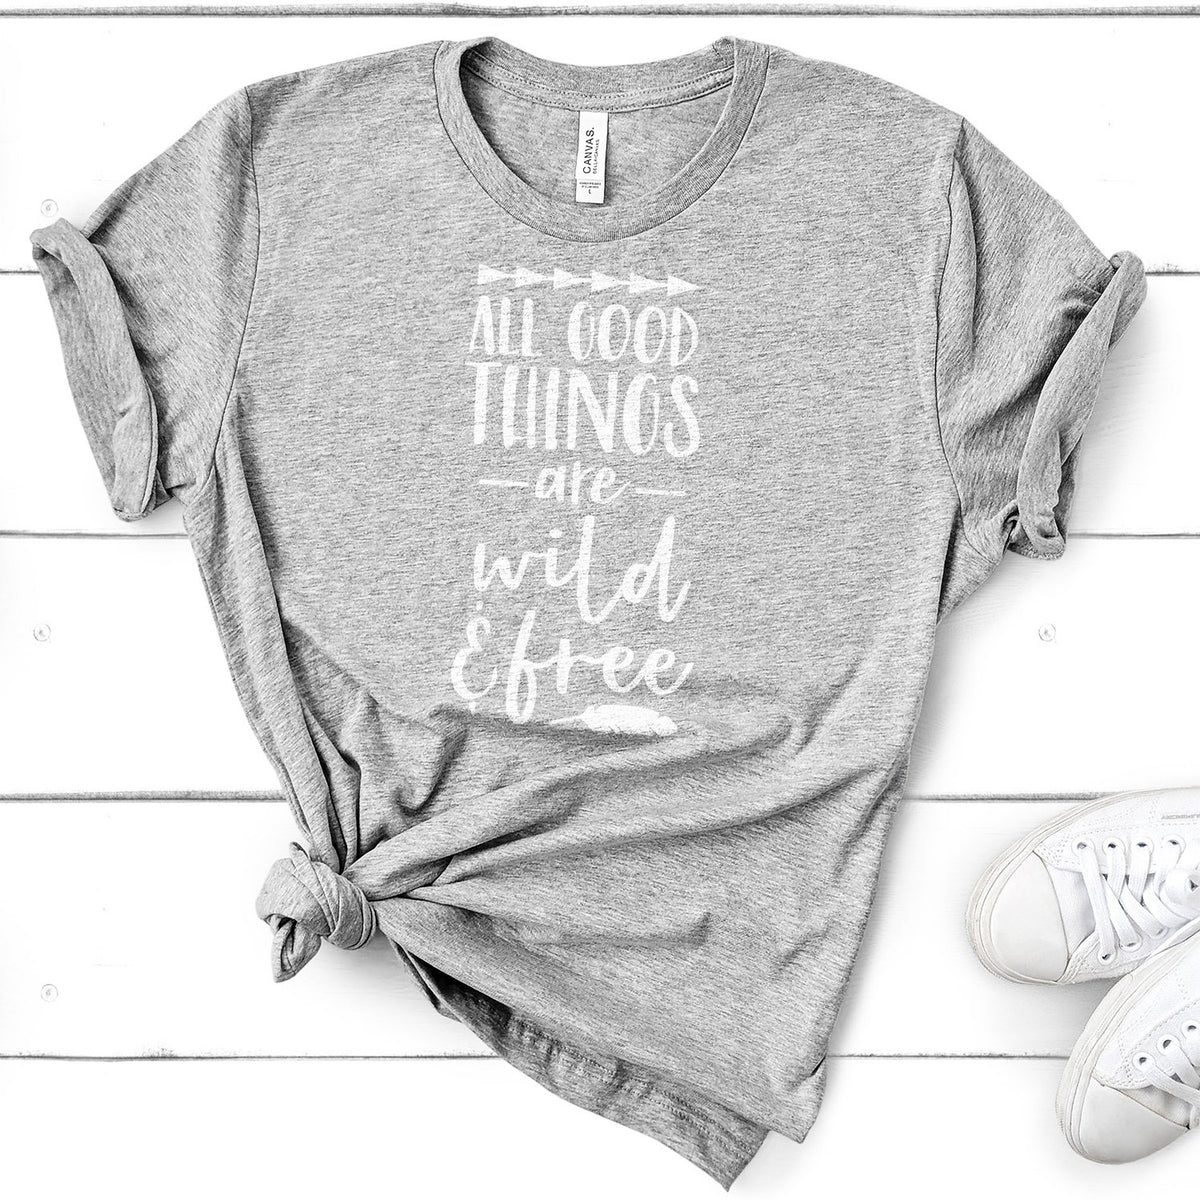 All Good Things Are Wild &amp; Free - Short Sleeve Tee Shirt